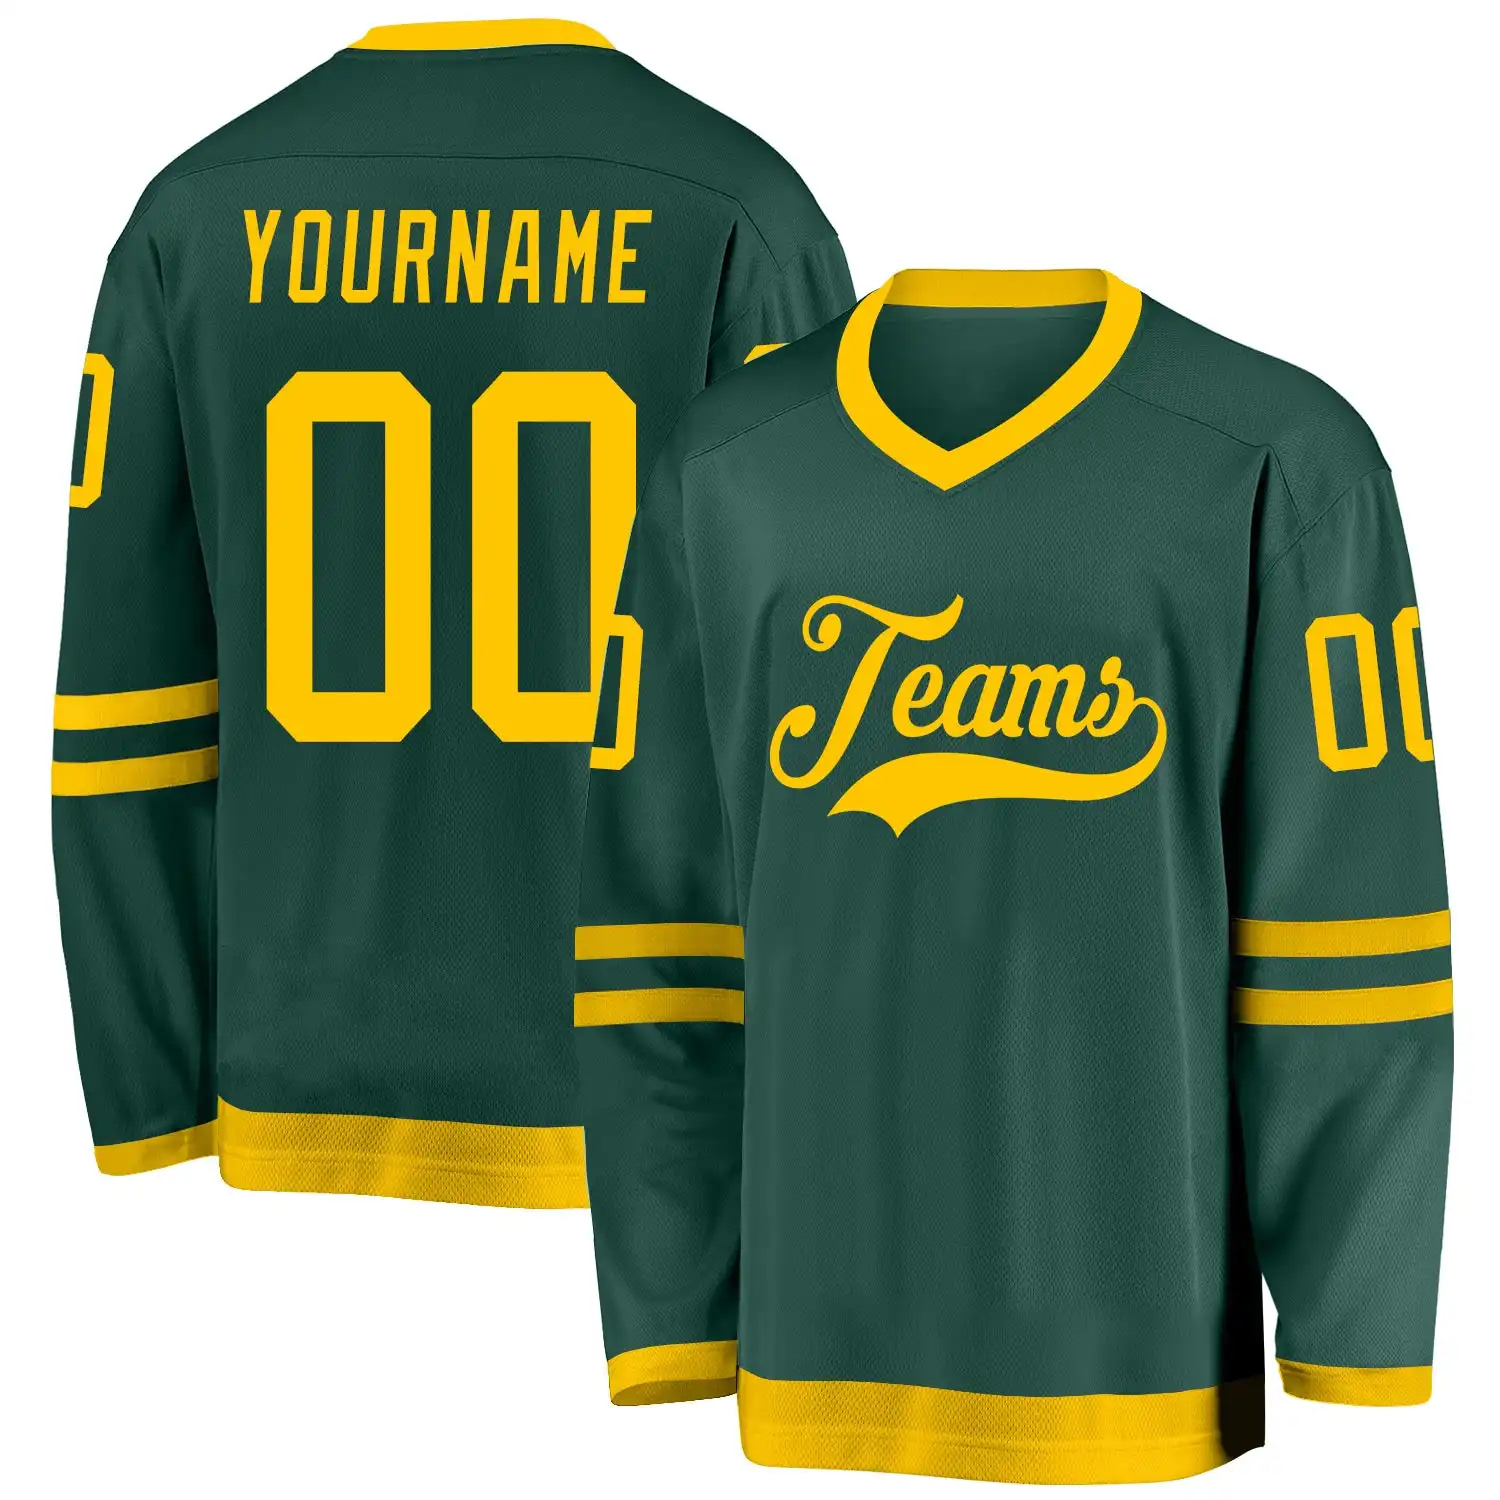 Stitched And Print Green Gold Hockey Jersey Custom